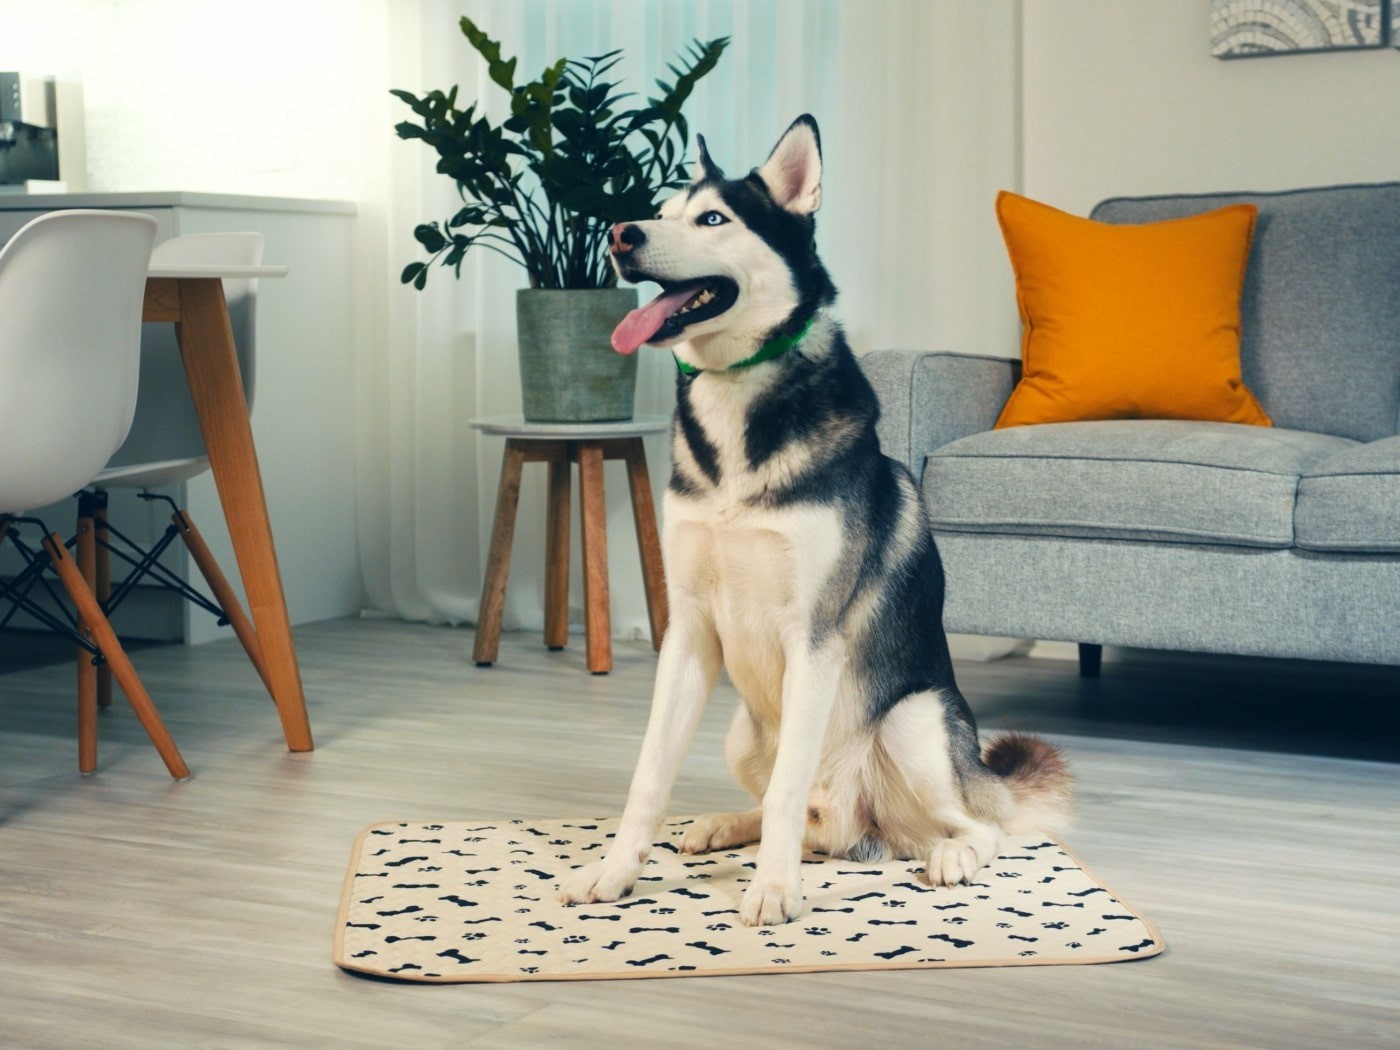 A husky dog sitting on a reusable pee pad in a living room